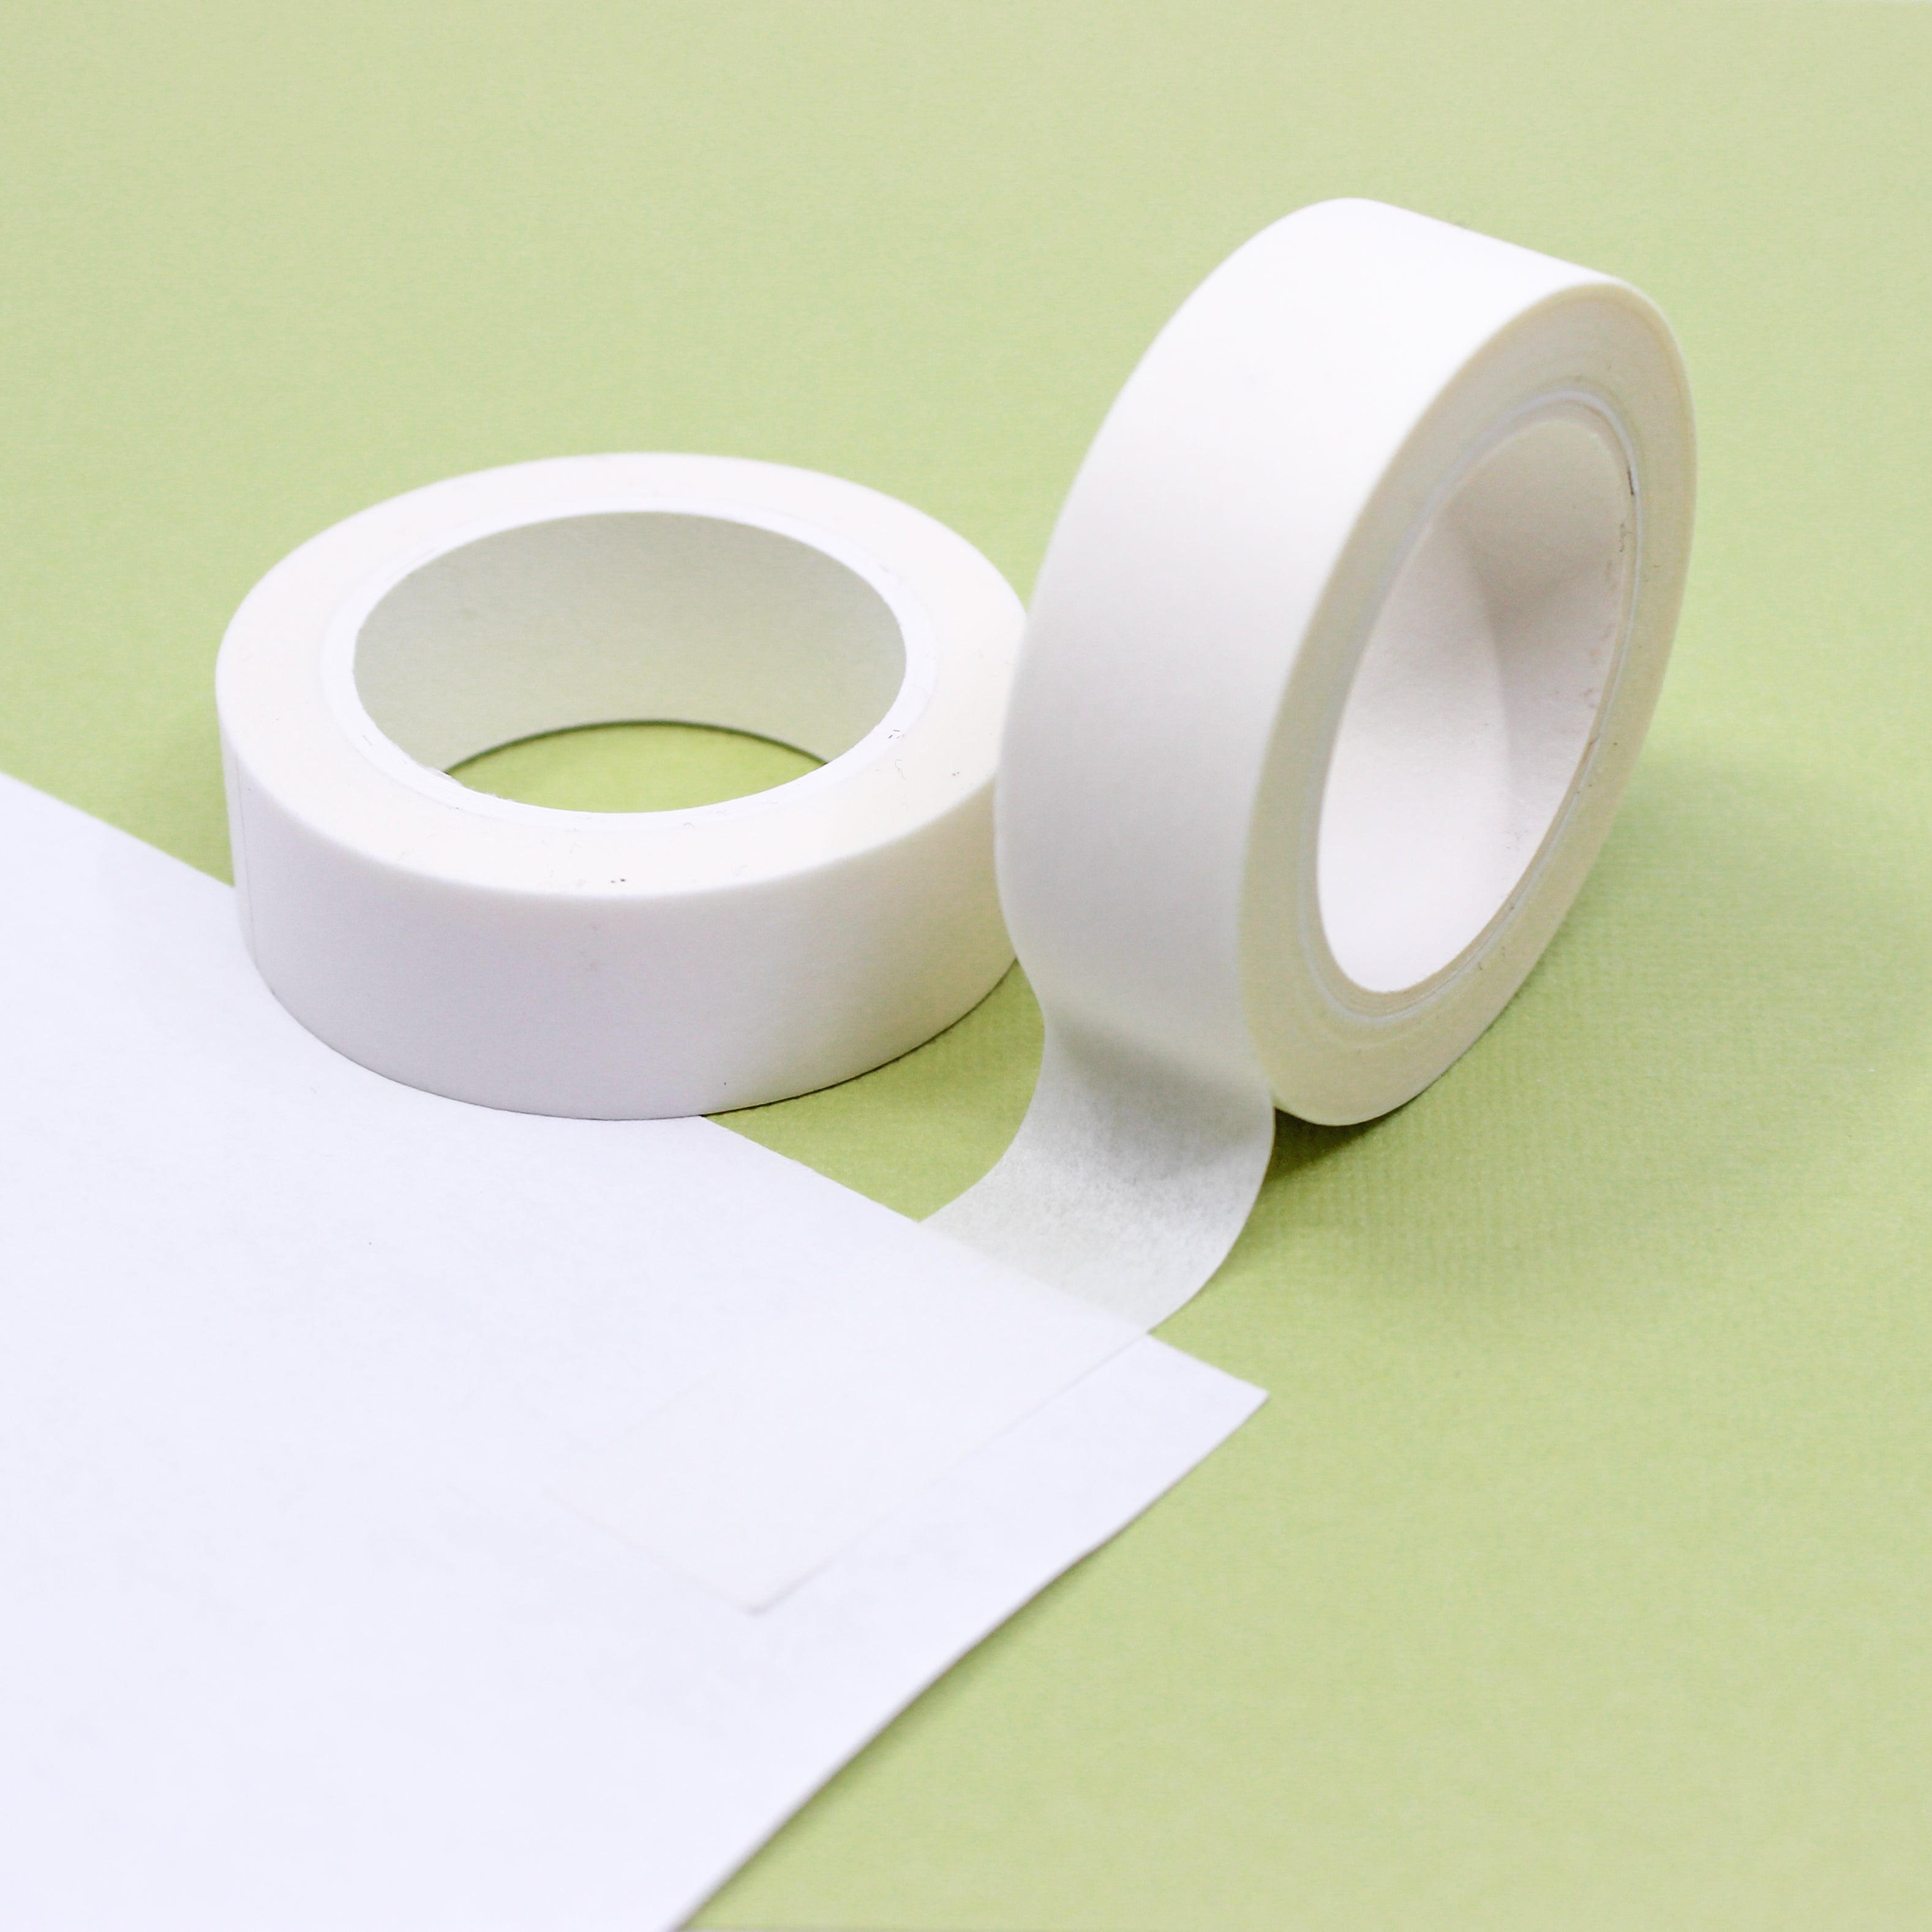 Elevate your creations with our captivating solid white washi tape, showcasing a simple and sleek white tape that provides a versatile background for your crafts. This tape is sold exclusively at BBB Supplies Craft Shop.